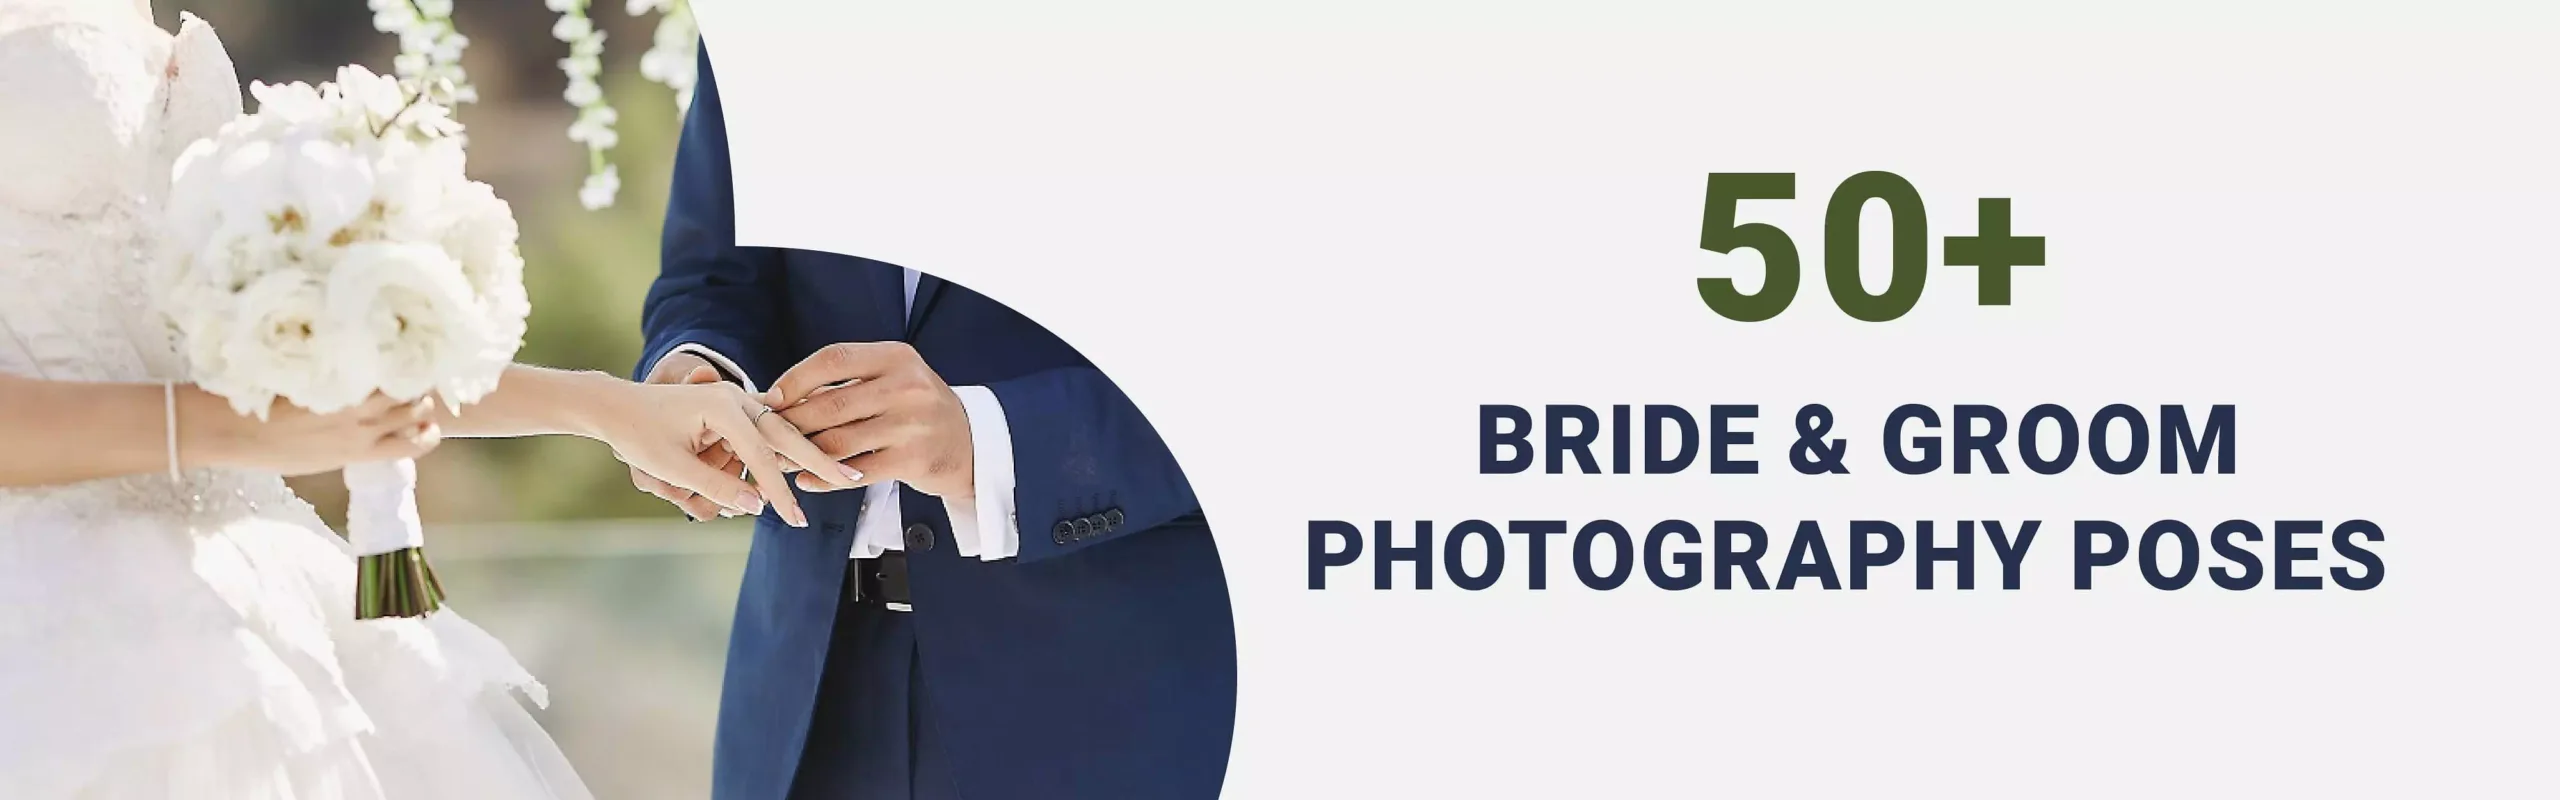 Bride and Groom Photography Poses